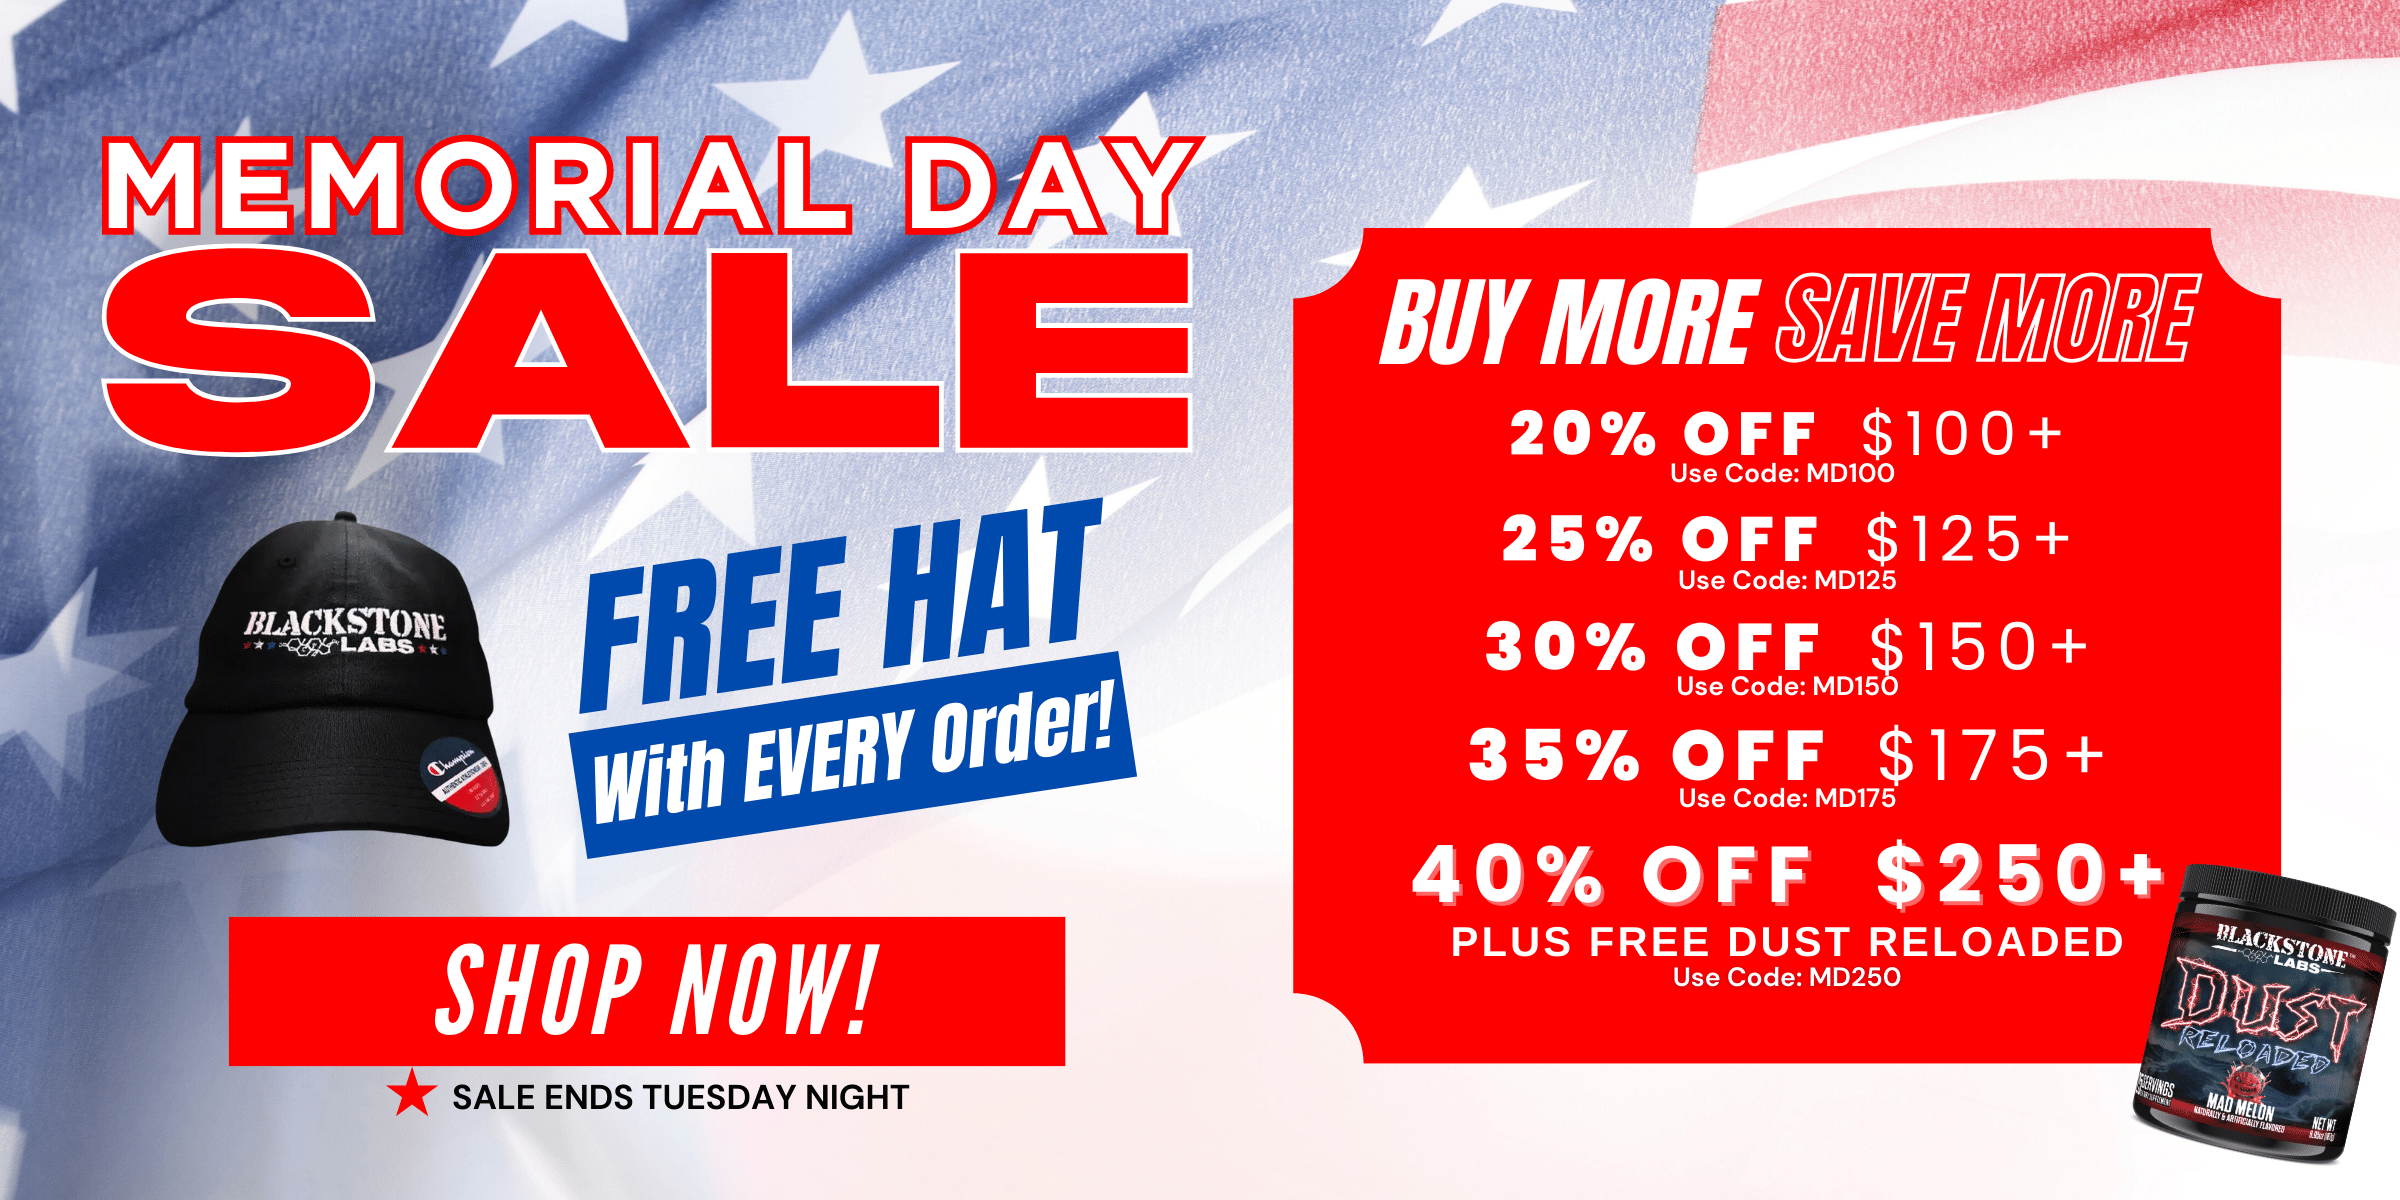 Memorial Day Sale. Free Hat with EVERY order! Shop Now! Buy More Save More 20% off at $100+ use code MD100. 25% off $125+ use code MD125. 30% off $150+ use code MD150. 35% off $175+ use code MD175. 40% off $250 PLUS free Dust Reloaded, use code MD250. Sale ends Tuesday Night